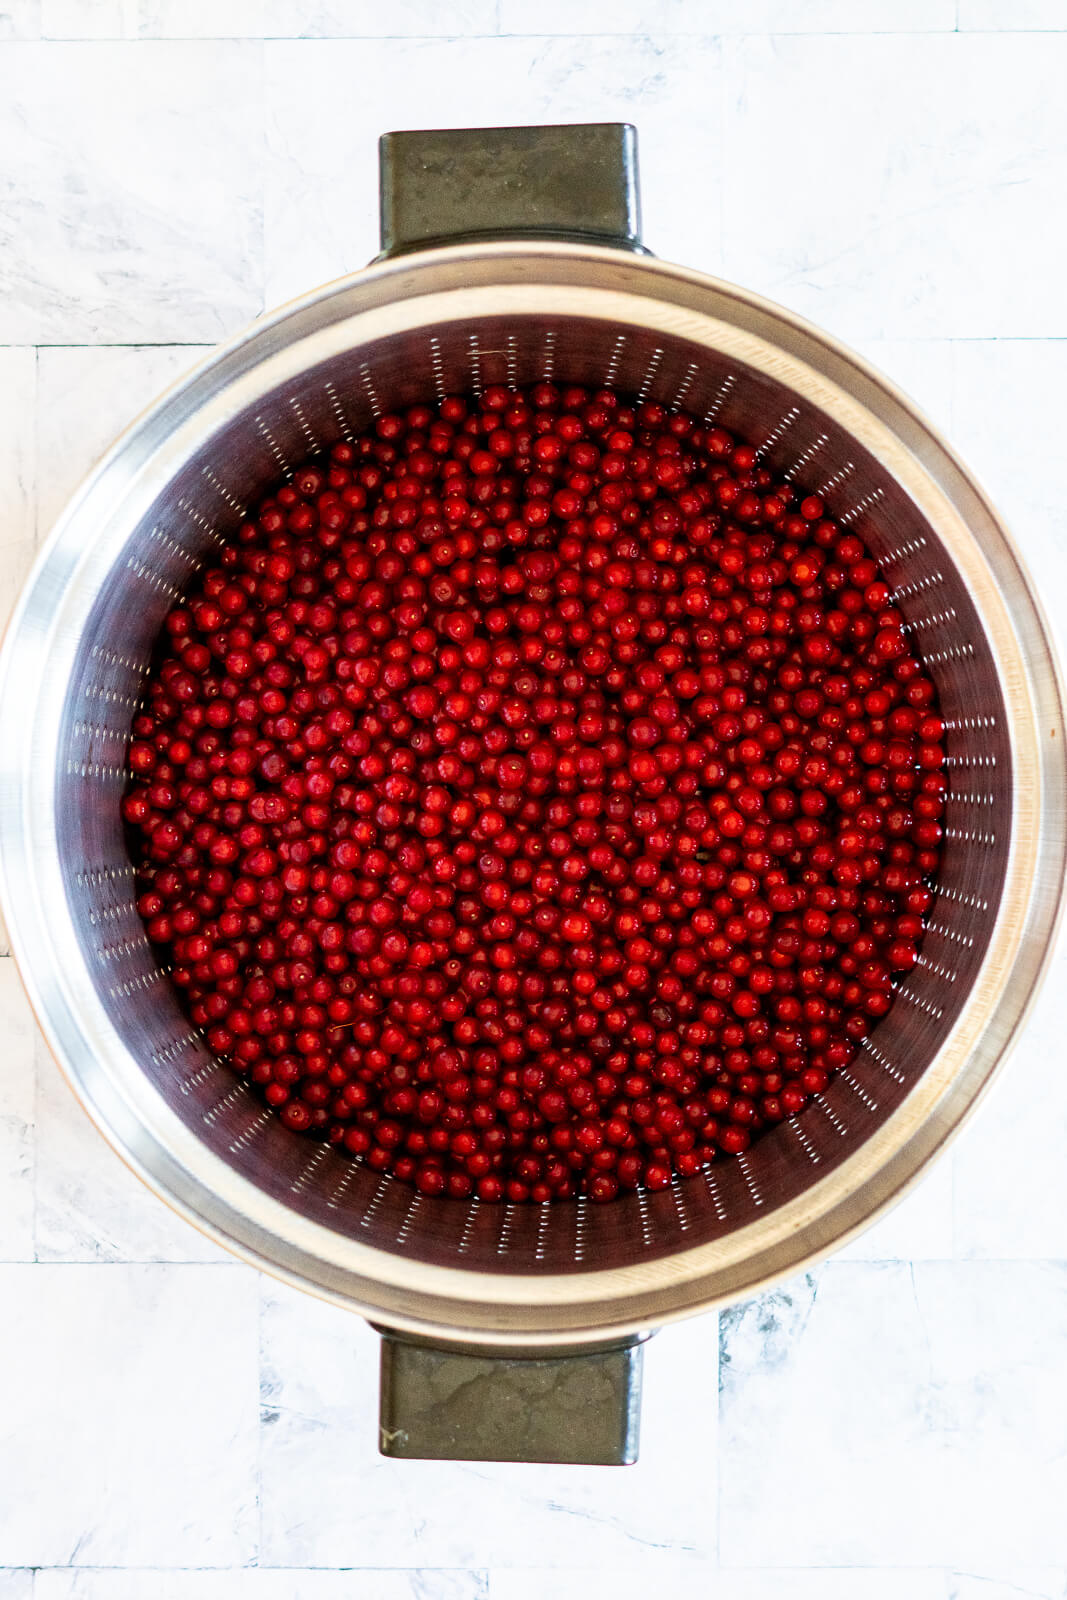 Pin cherries in a steam juicer. 